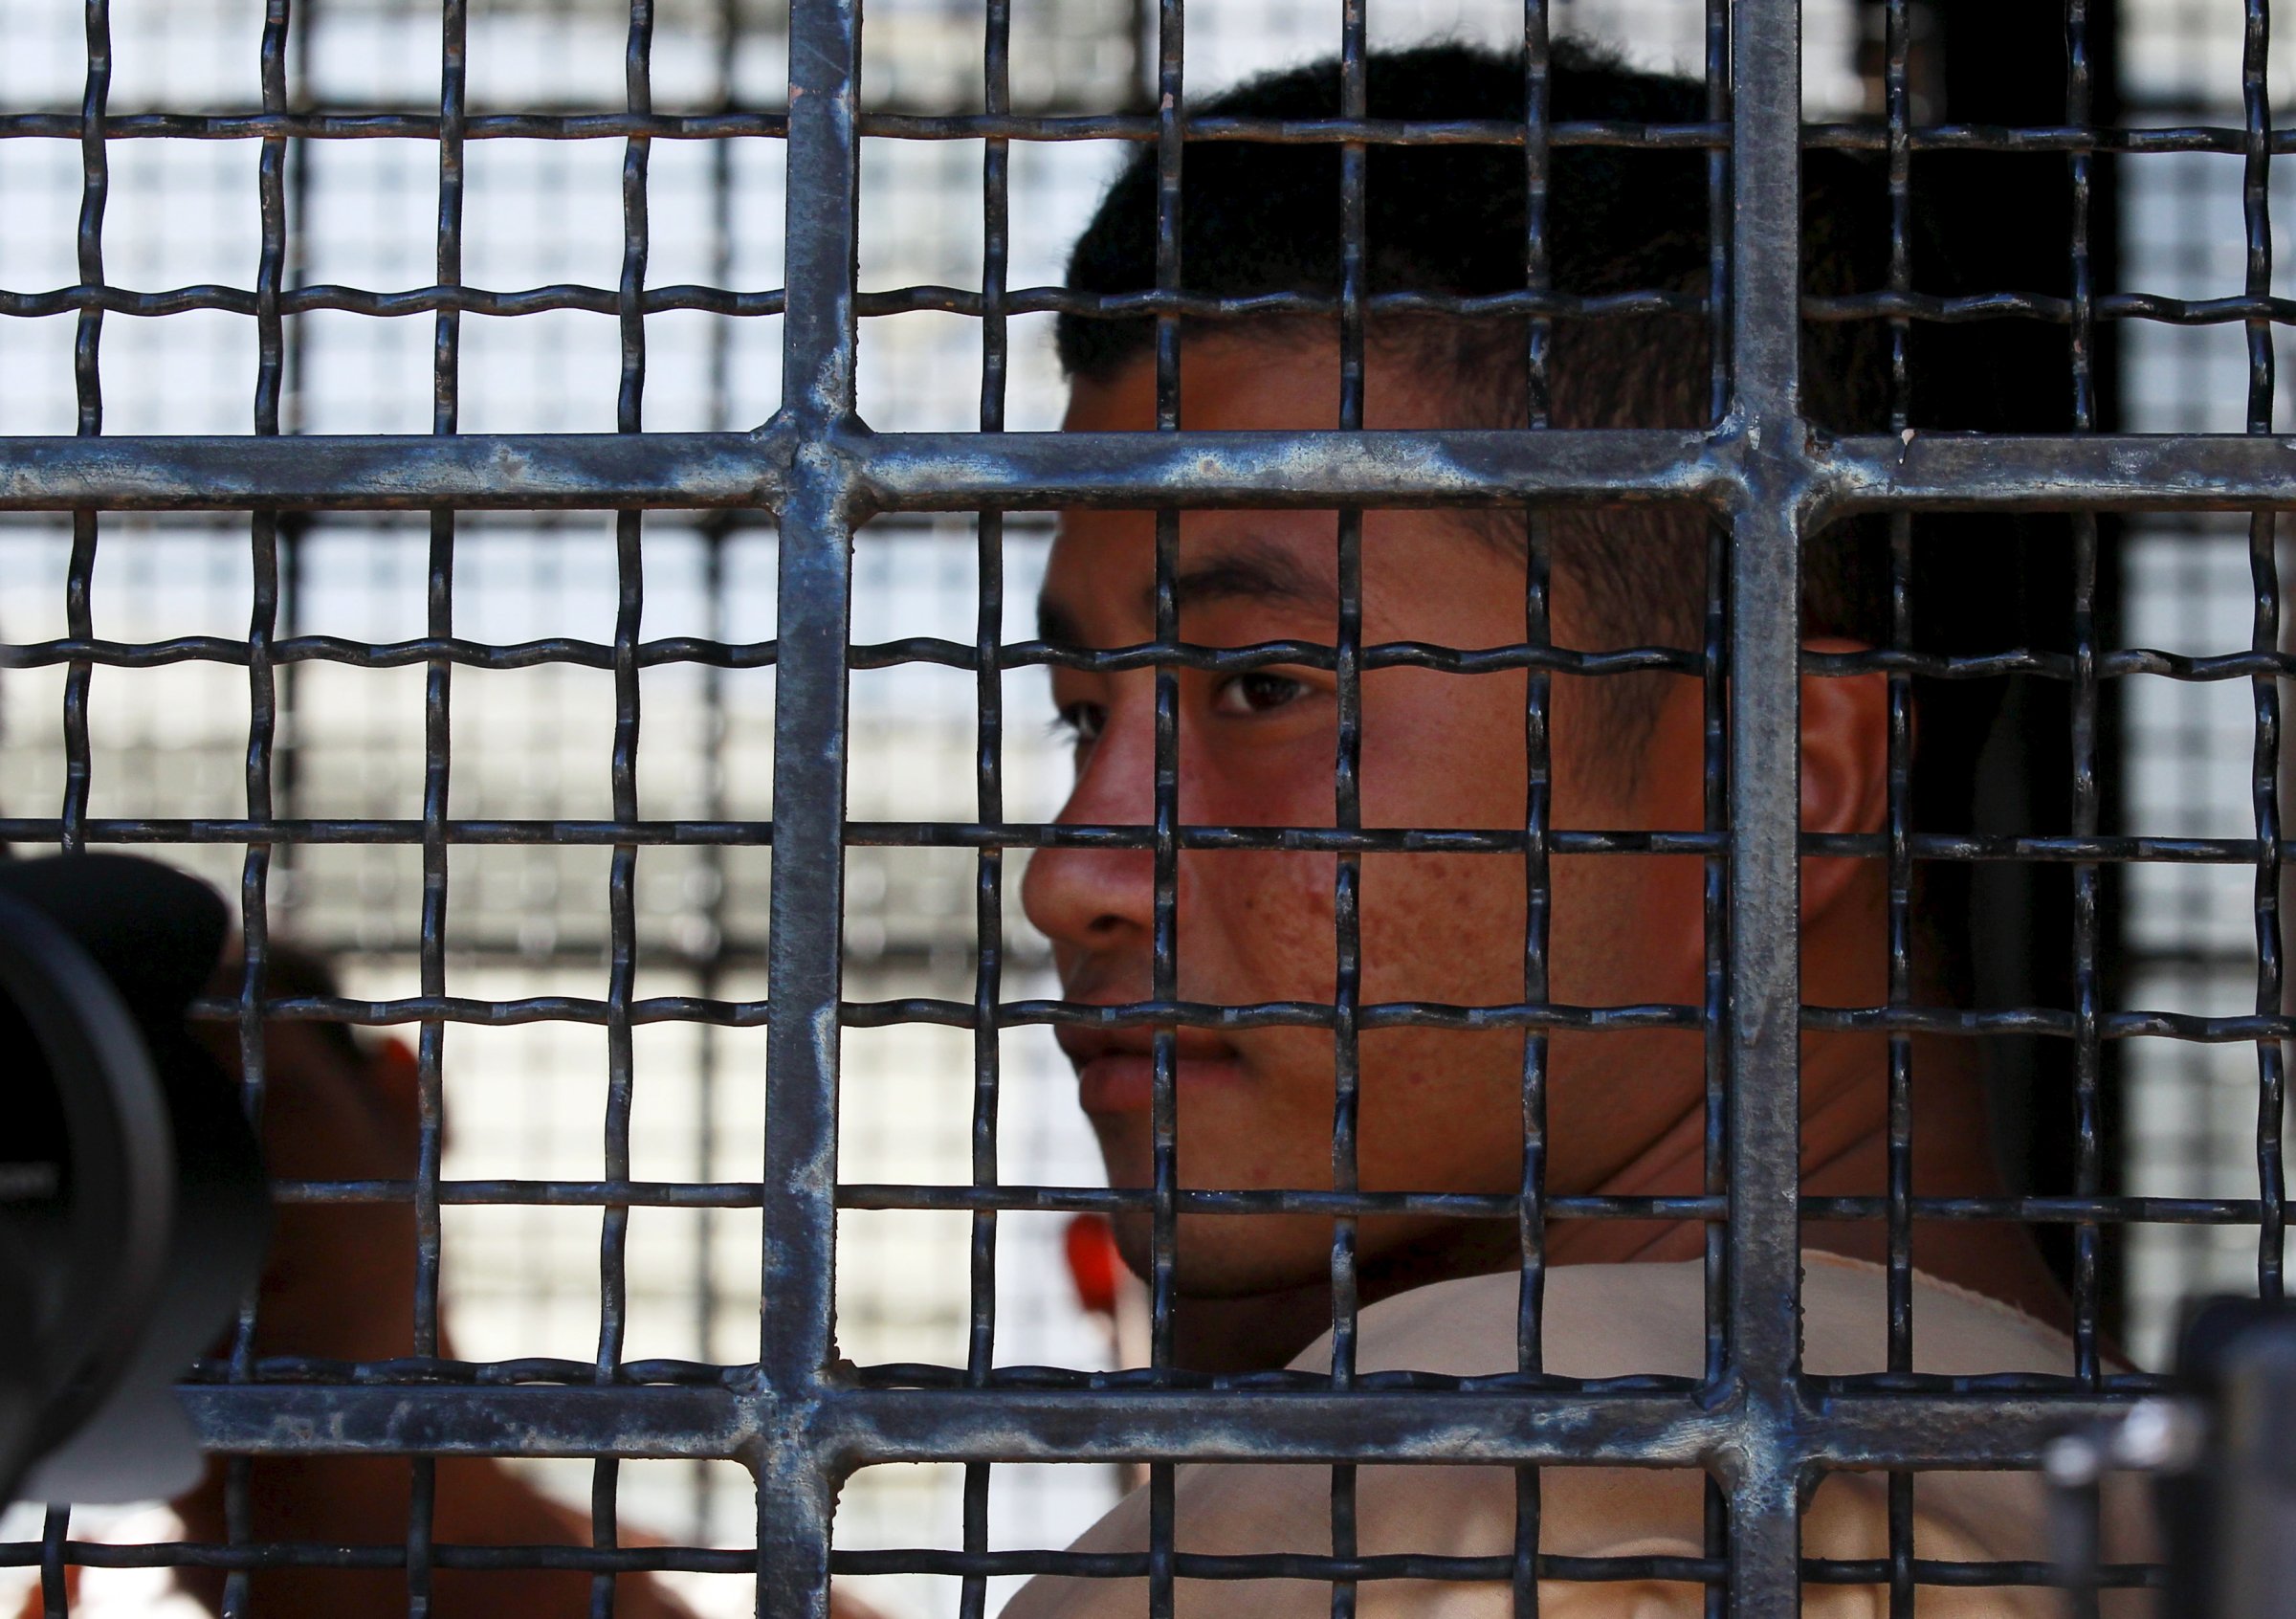 Myanmar migrant worker Win Zaw Htun sits in a prison truck as he arrives at the Koh Samui Provincial Court, in Koh Samui